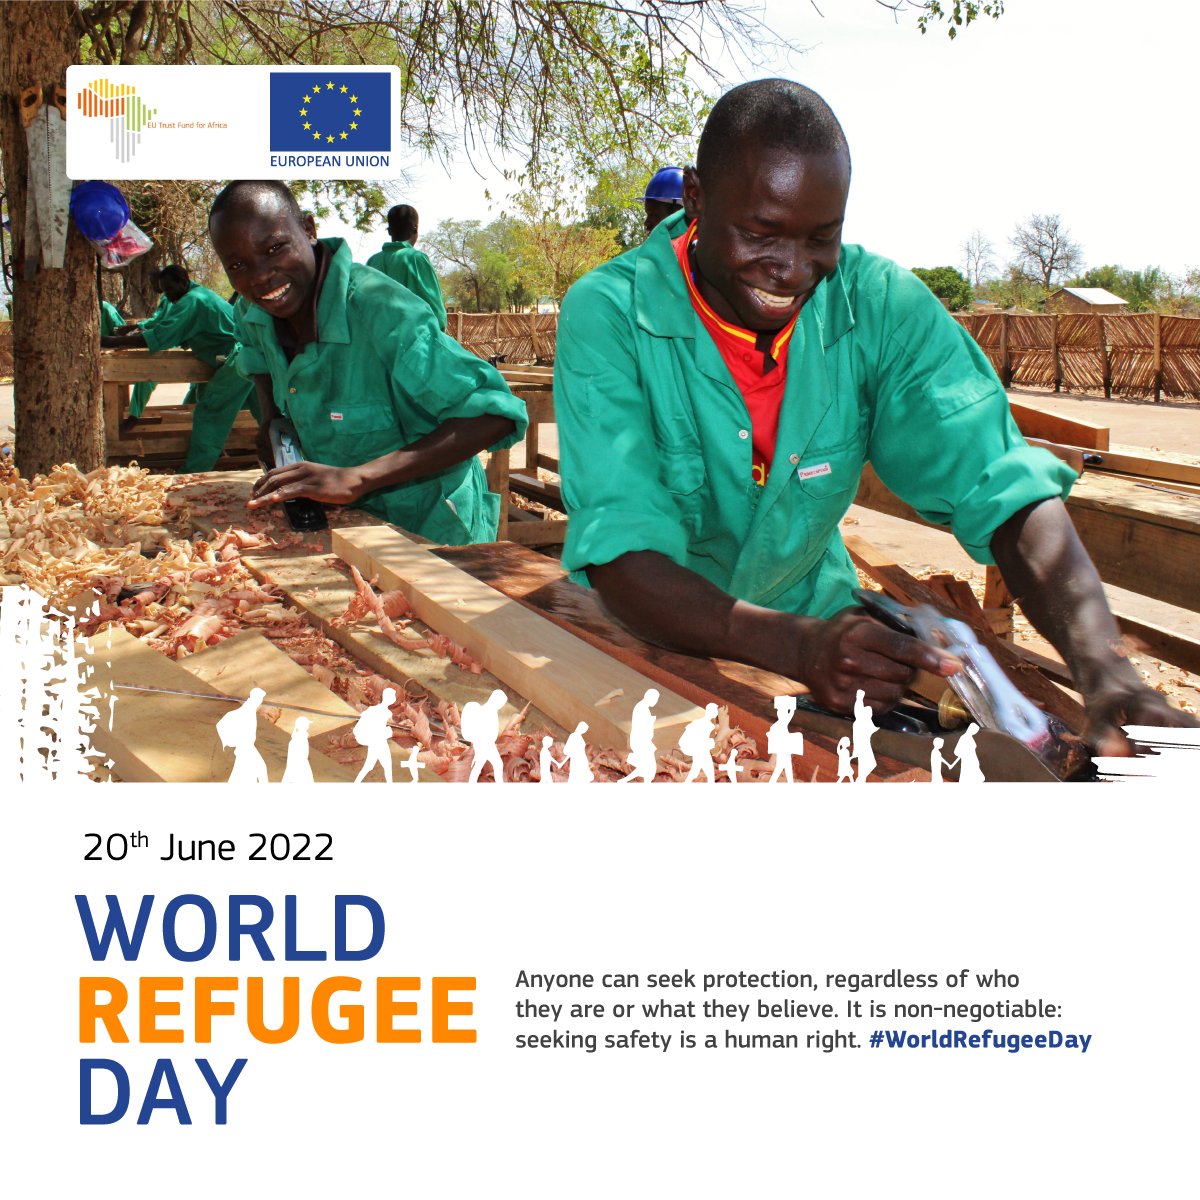 With over 1.5 million refugees, Uganda 🇺🇬 hosts the largest number of refugees in Africa. On this #WorldRefugeeDay, #TeamEurope 🇪🇺 commends @GovUganda for its progressive refugee hosting policy and for providing a safe haven for refugees. #WithRefugees #EUandUganda